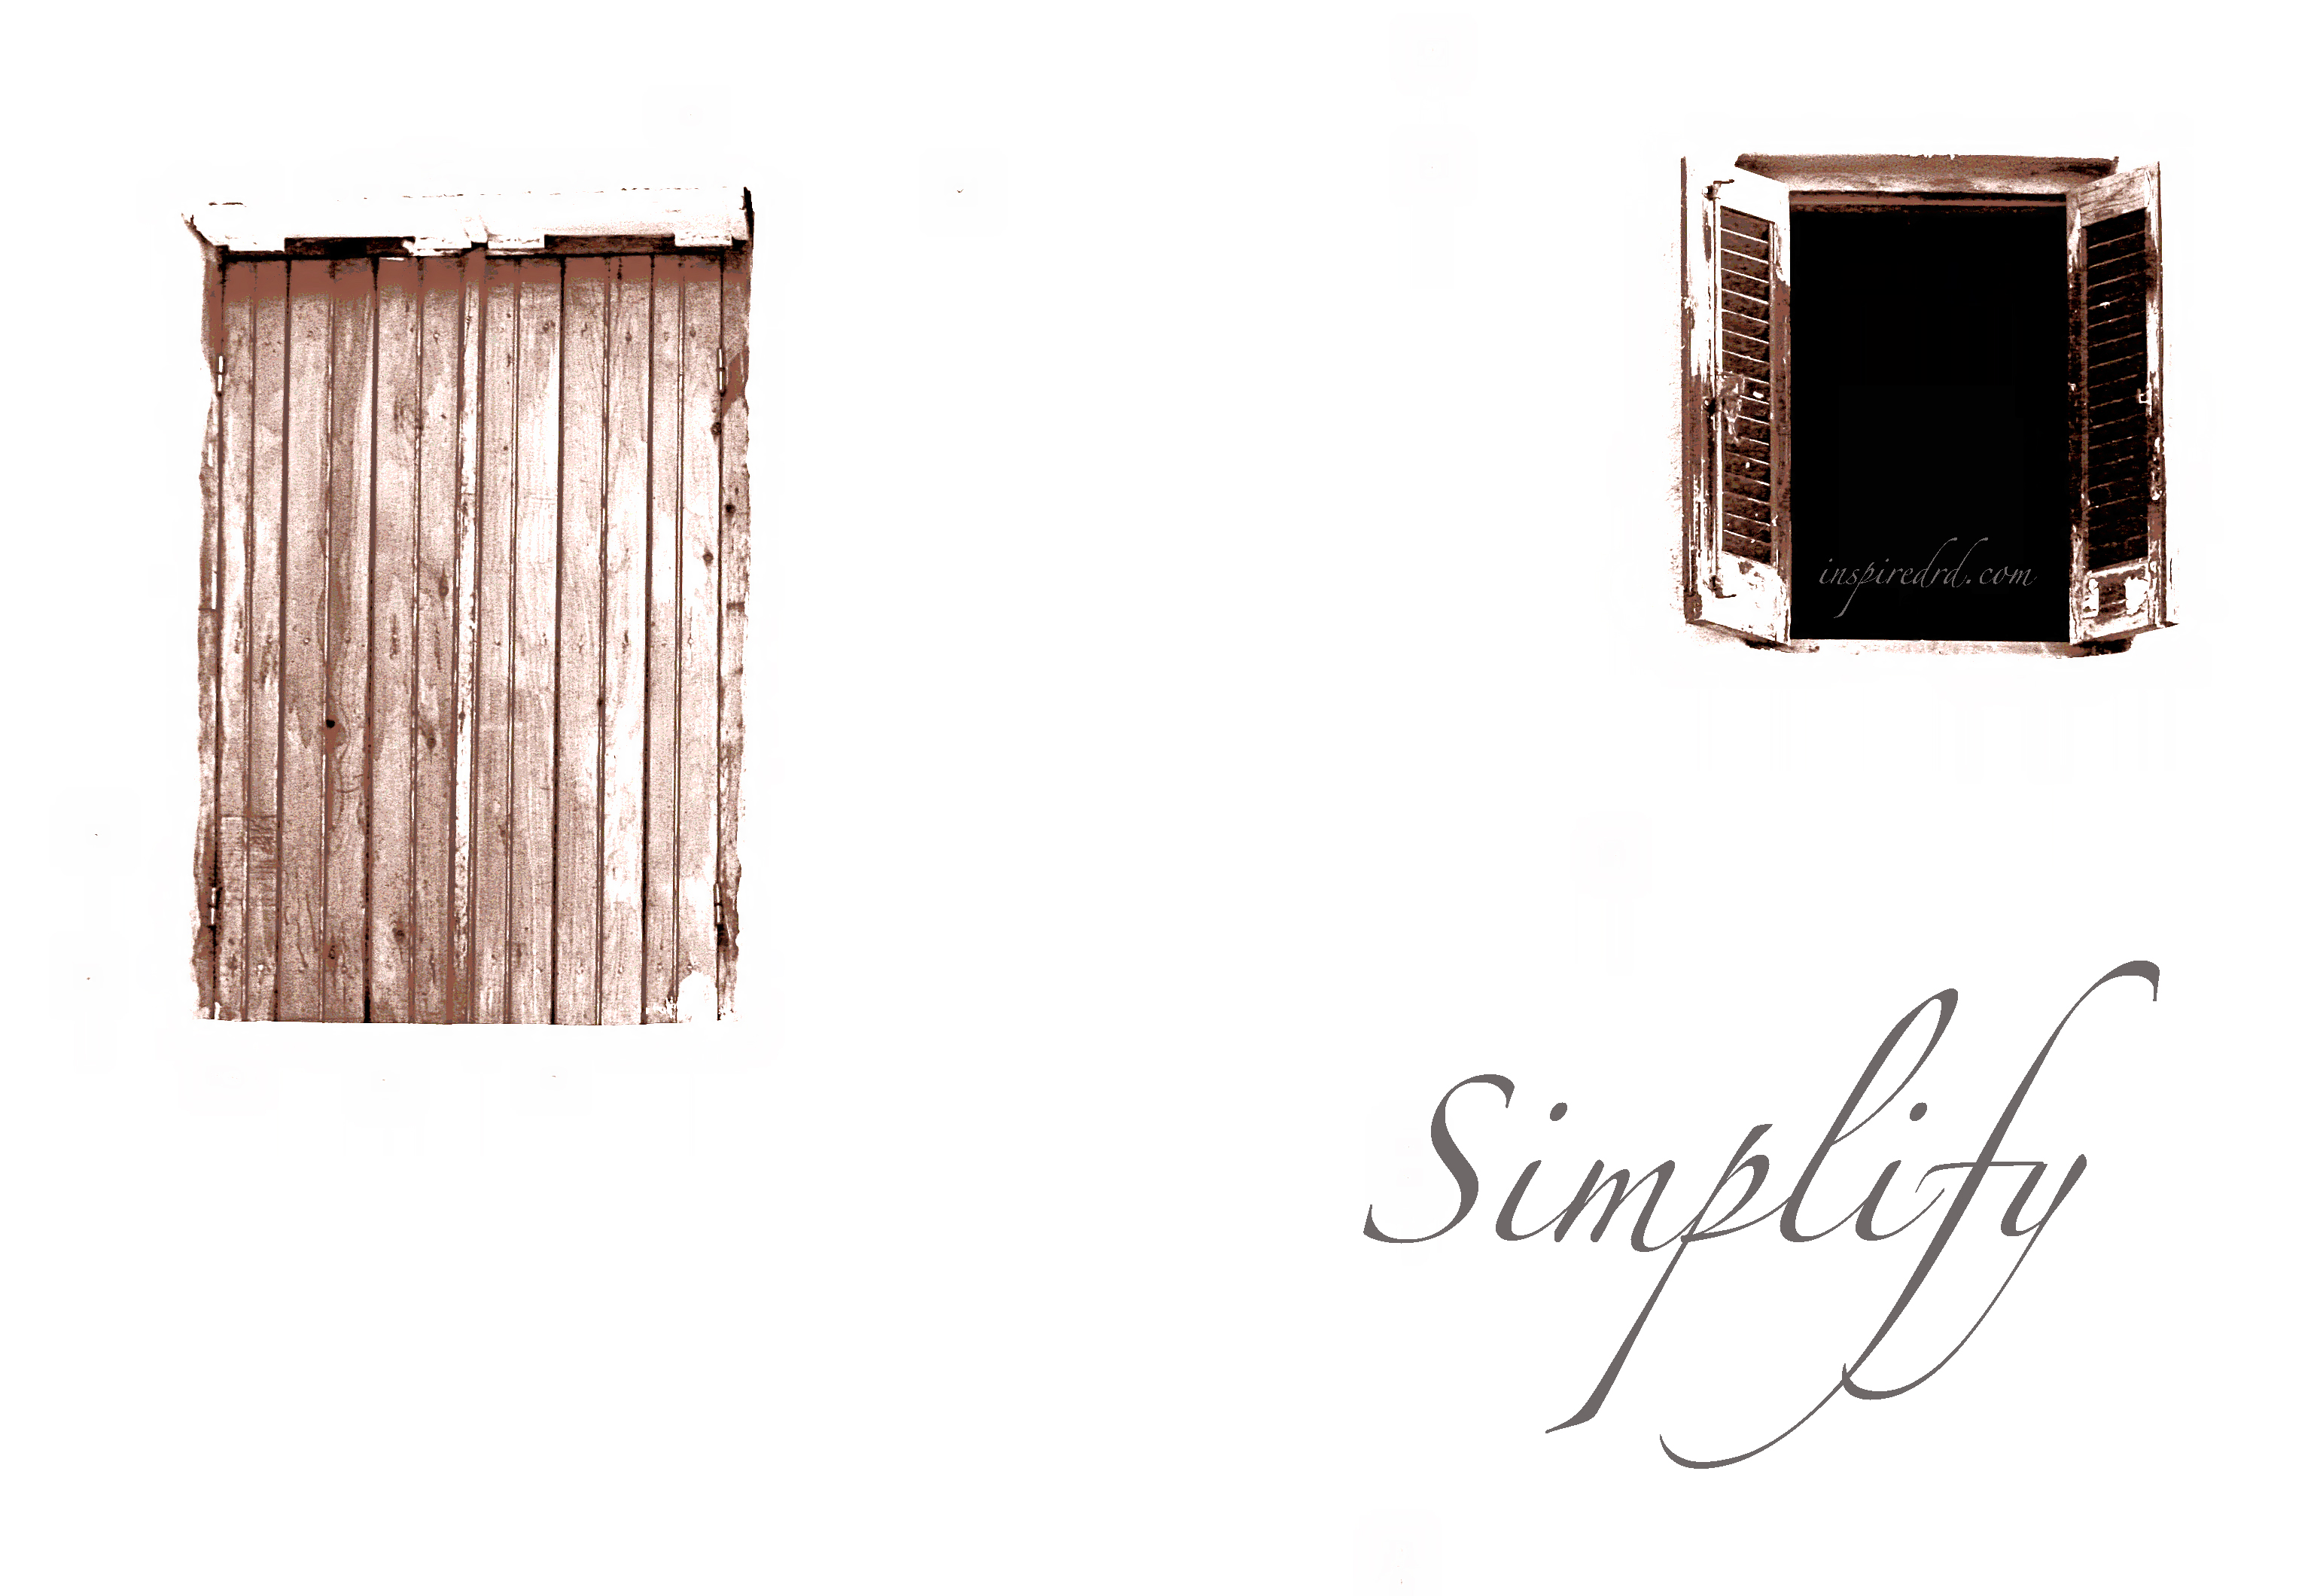 Why I want to simplify (and how you can too) from inspiredrd.com